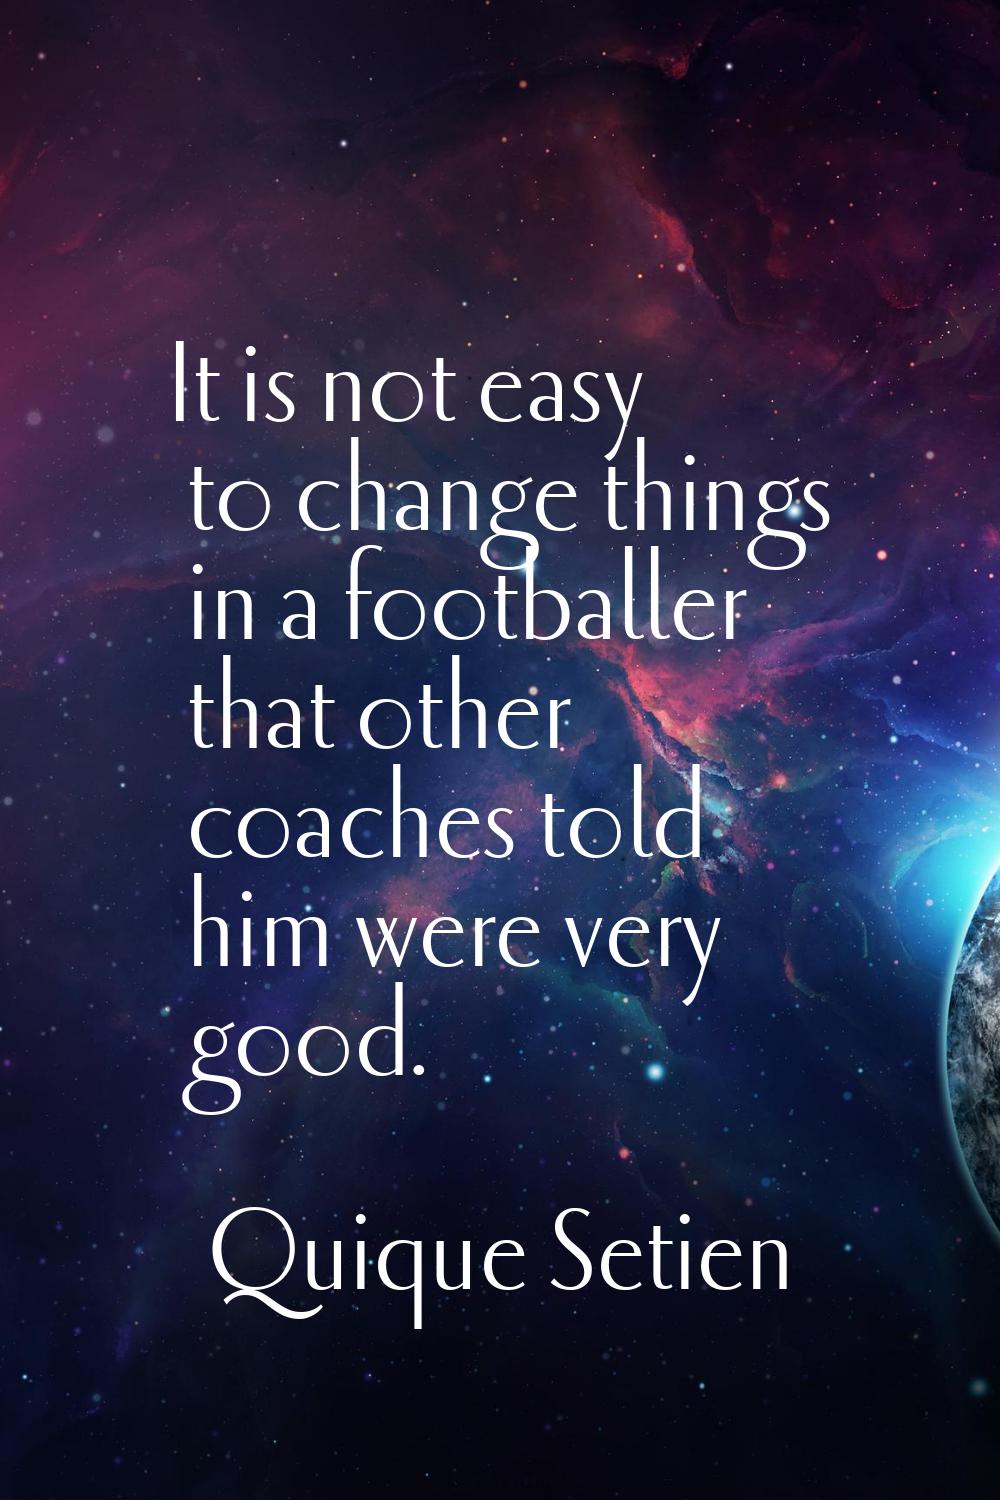 It is not easy to change things in a footballer that other coaches told him were very good.